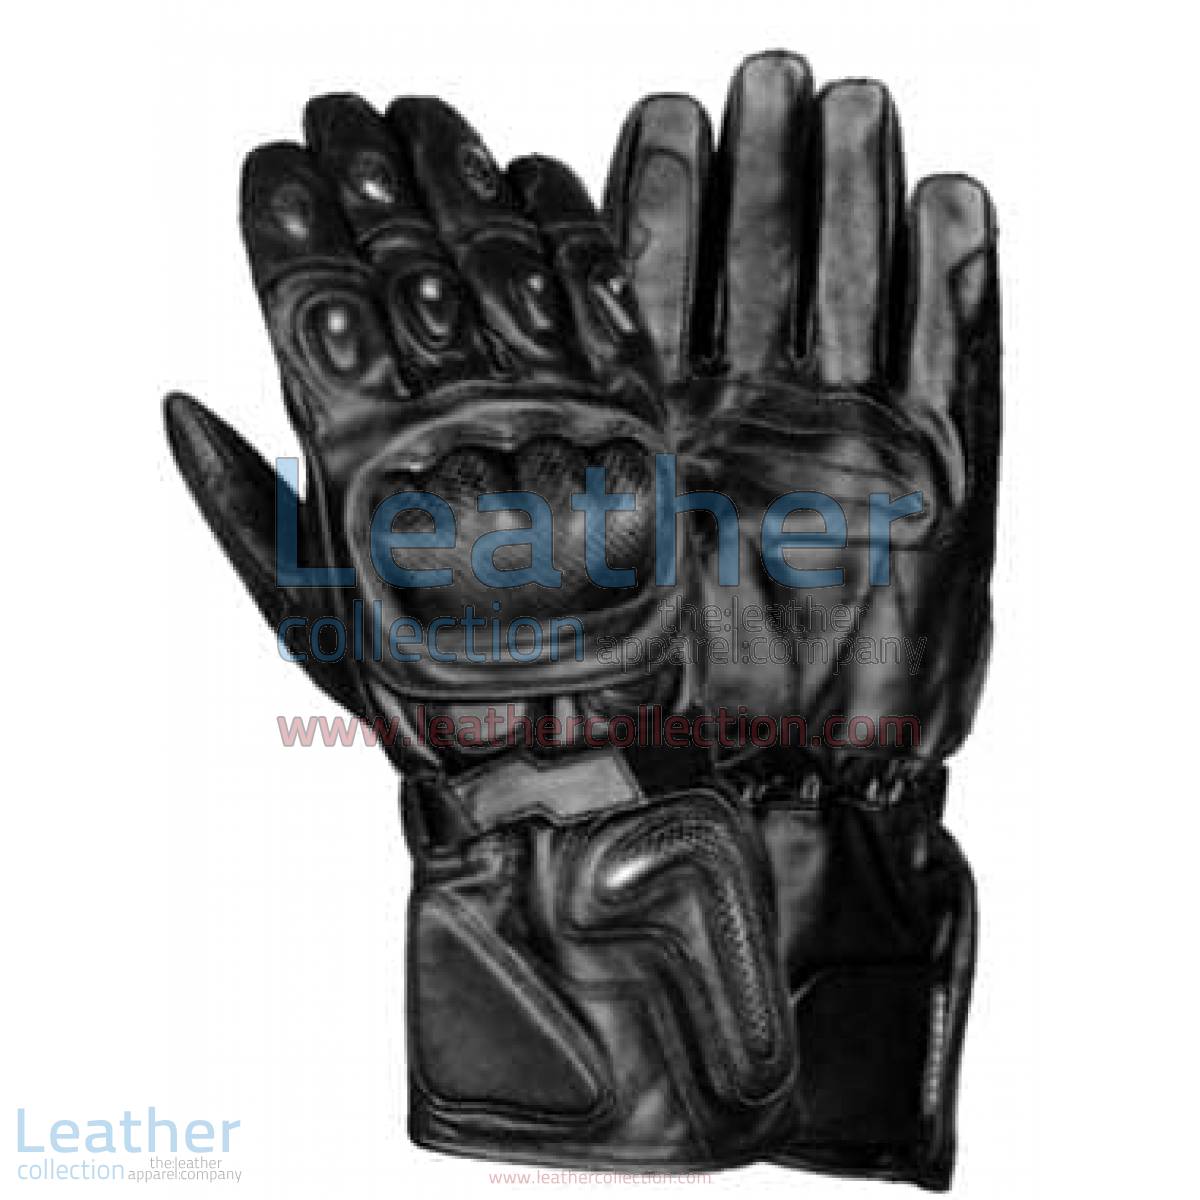 Silverstone Motorbike Riding Gloves | motorcycle riding gloves